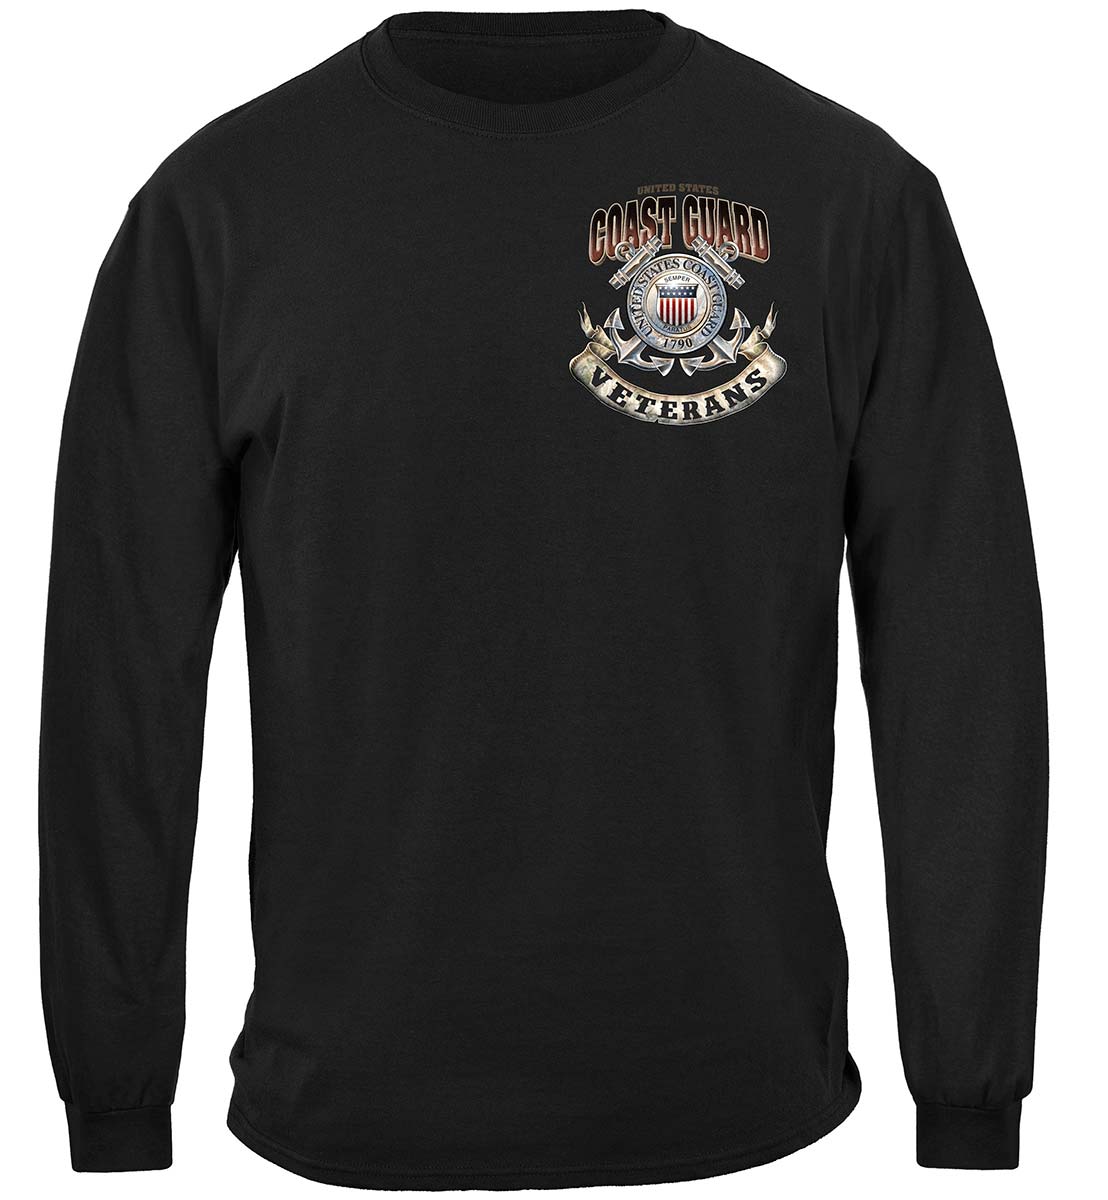 Coast Guard Proud To Have Served Premium Hooded Sweat Shirt